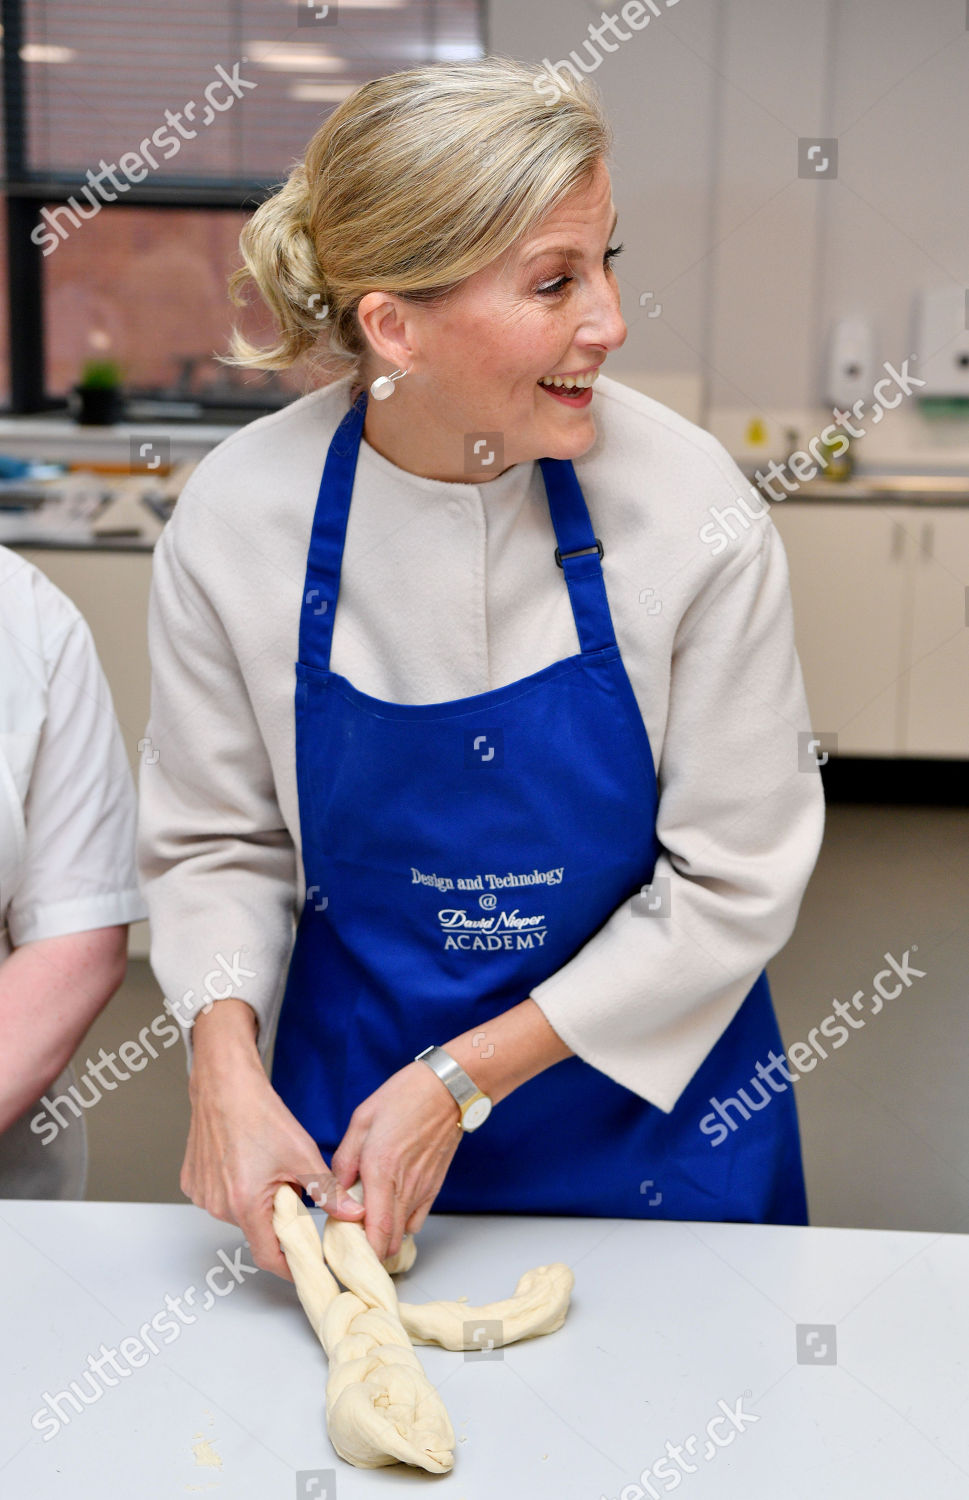 sophie-countess-of-wessex-visit-to-alfreton-uk-shutterstock-editorial-9988163p.jpg